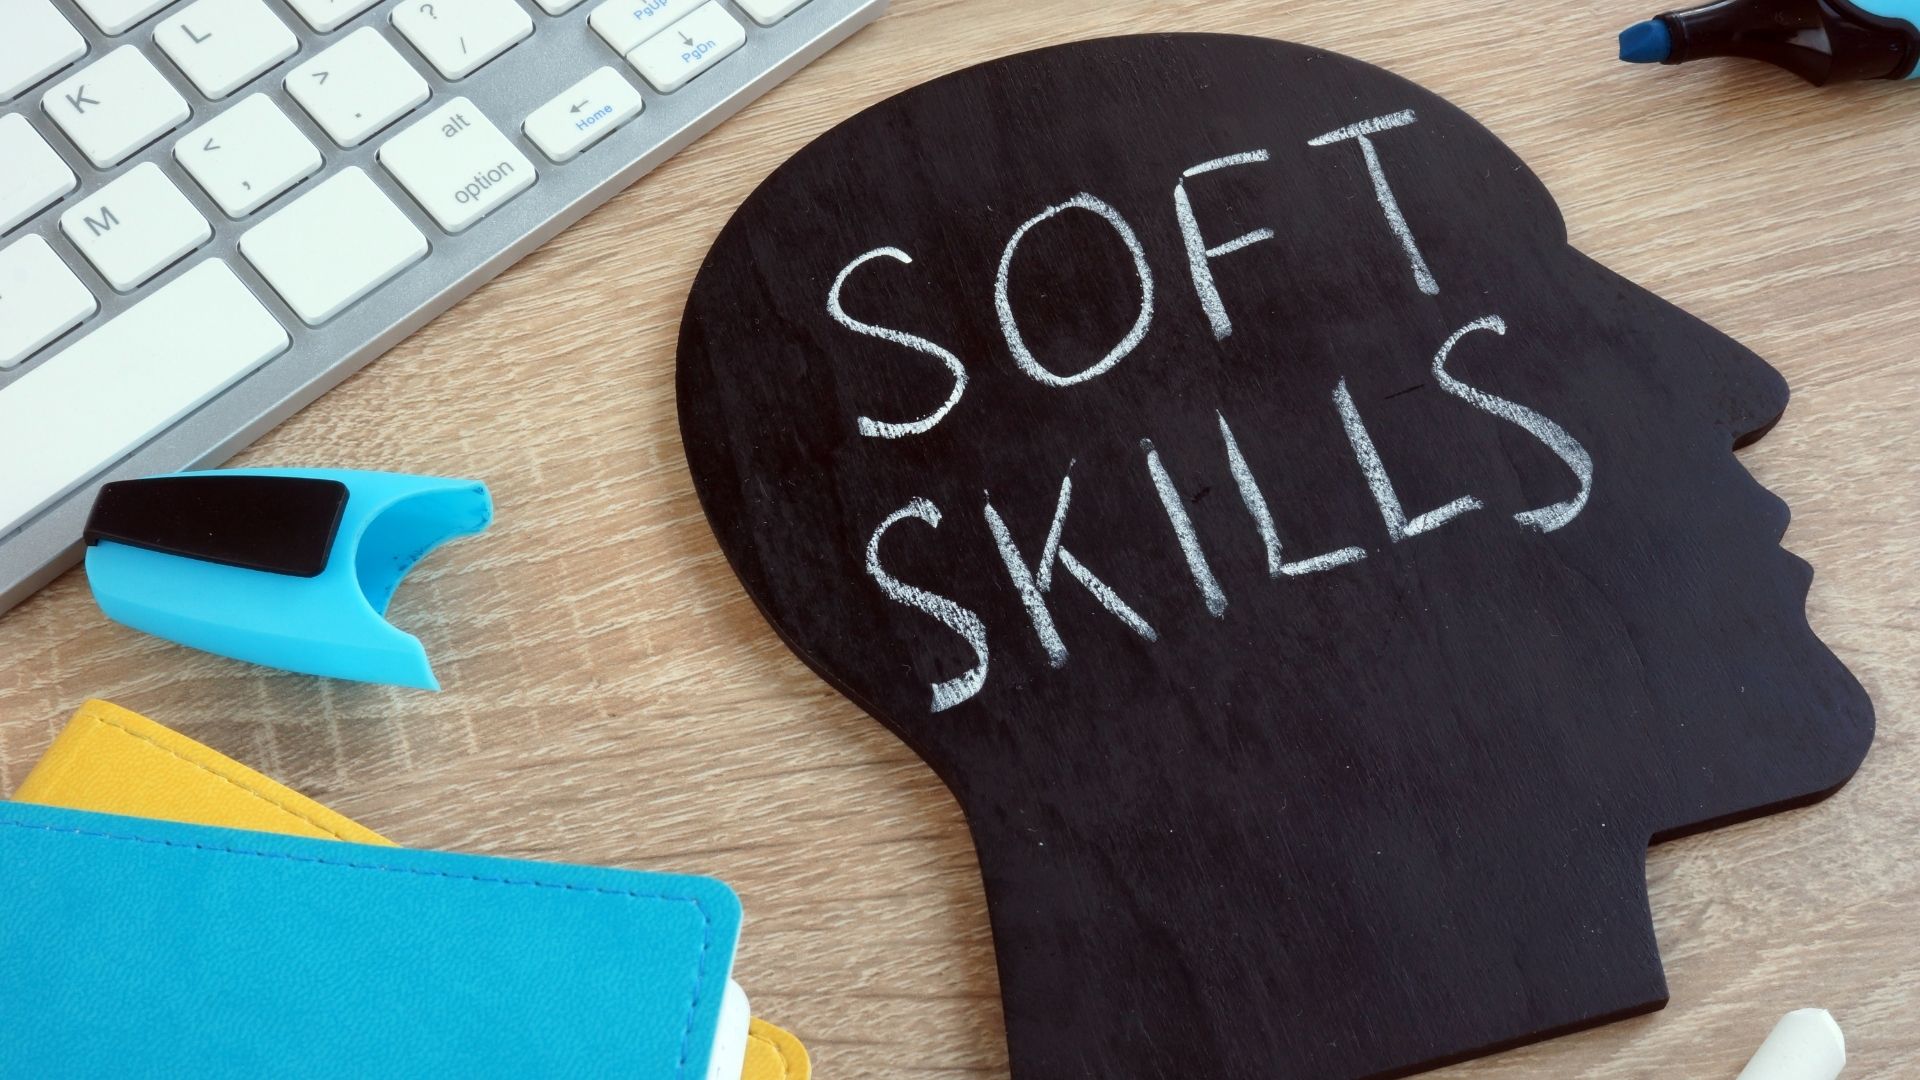 Photo of a head and computer keyboard to illustrate Soft Skills in the Workplace